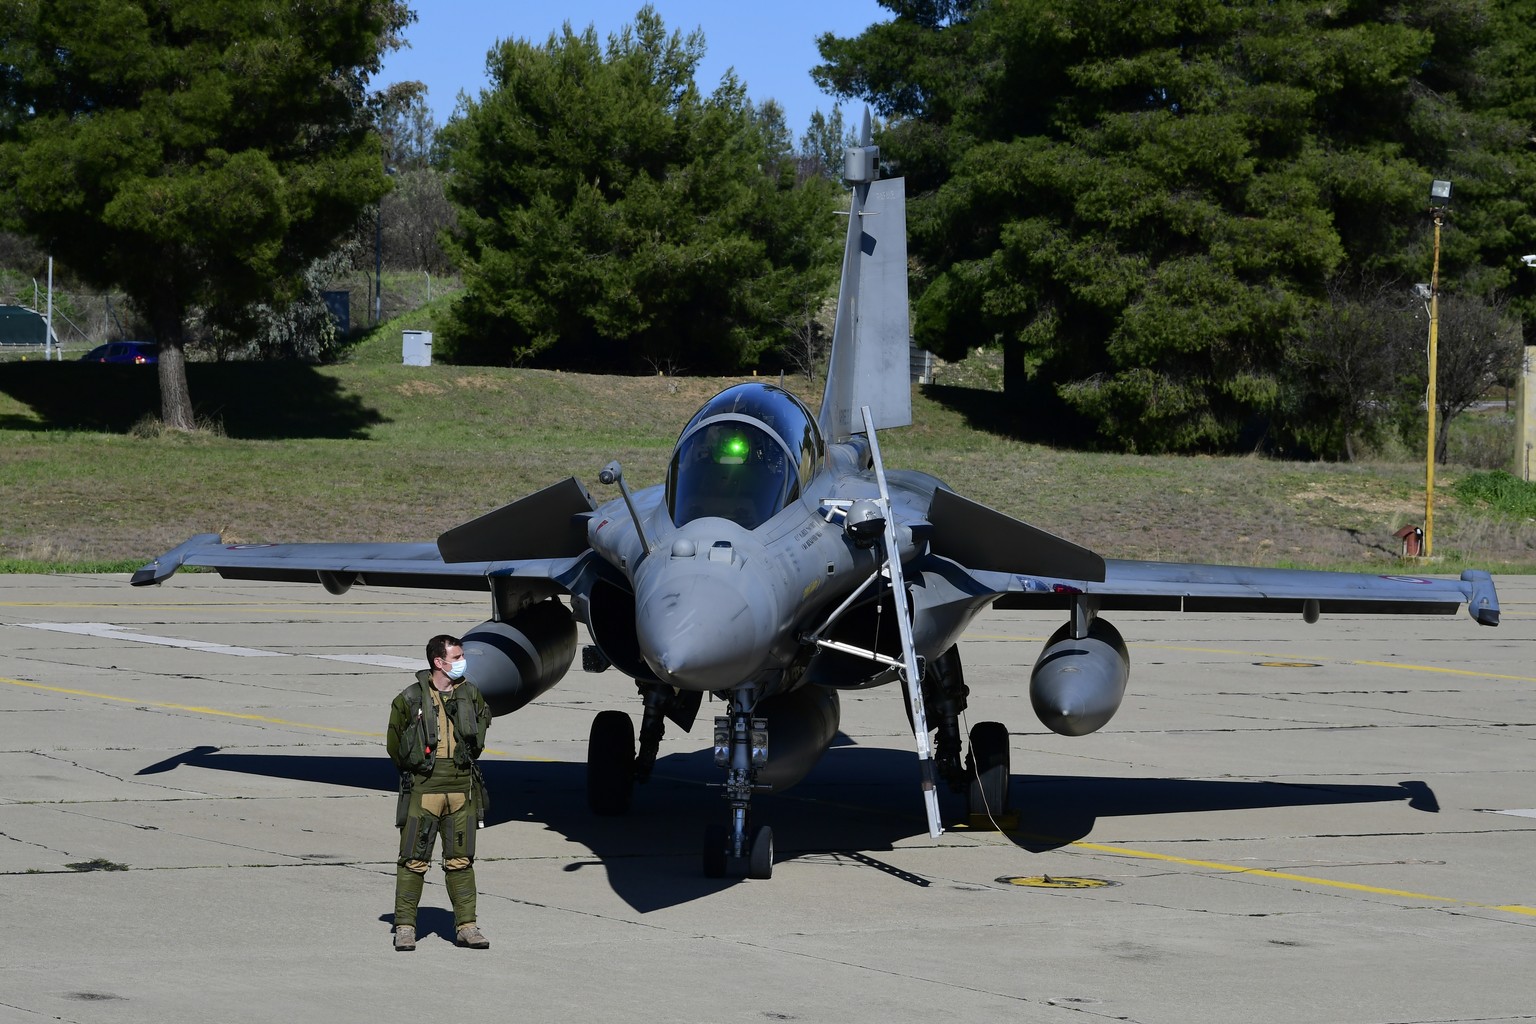 A Hellenic Airforce pilot stands by a French Airforce Rafale fighter jet during a joint military drill, at Tanagra military air base, about 82 kilometres (51miles) north of Athens, Greece, Thursday, F ...